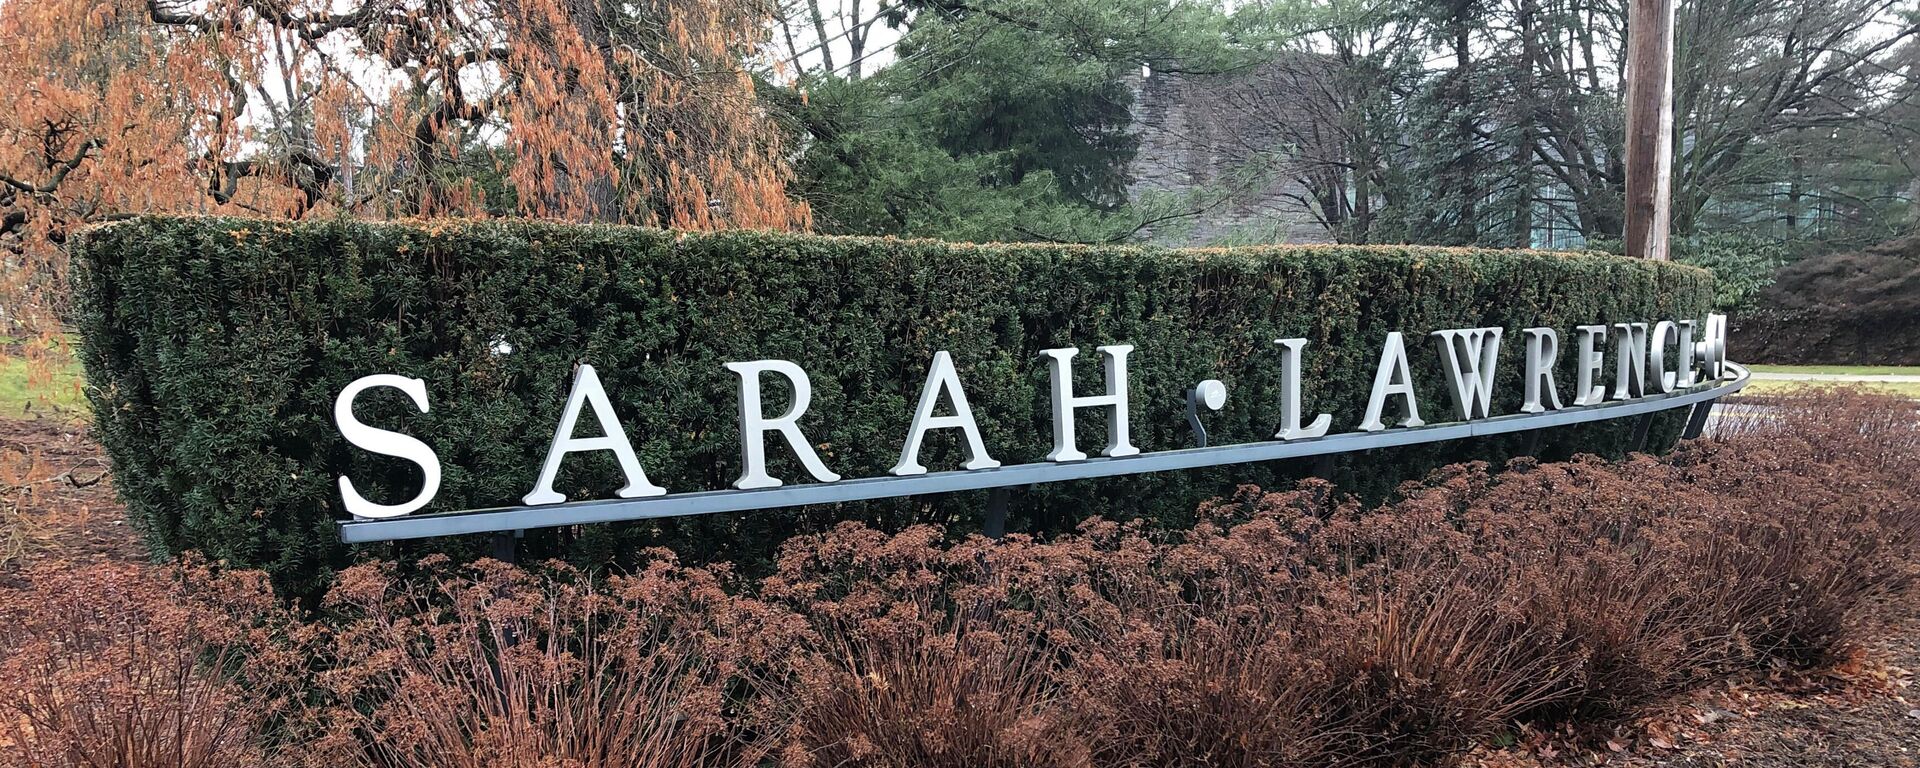 In this Feb. 11, 2020 file photo, a sign along a hedge row marks the campus of Sarah Lawrence College in Yonkers, N.Y. Lawrence Ray, charged with forcing some college students into prostitution after moving in on campus at Sarah Lawrence College with his daughter, has raised questions about the screening and security of student housing. - Sputnik International, 1920, 23.03.2022